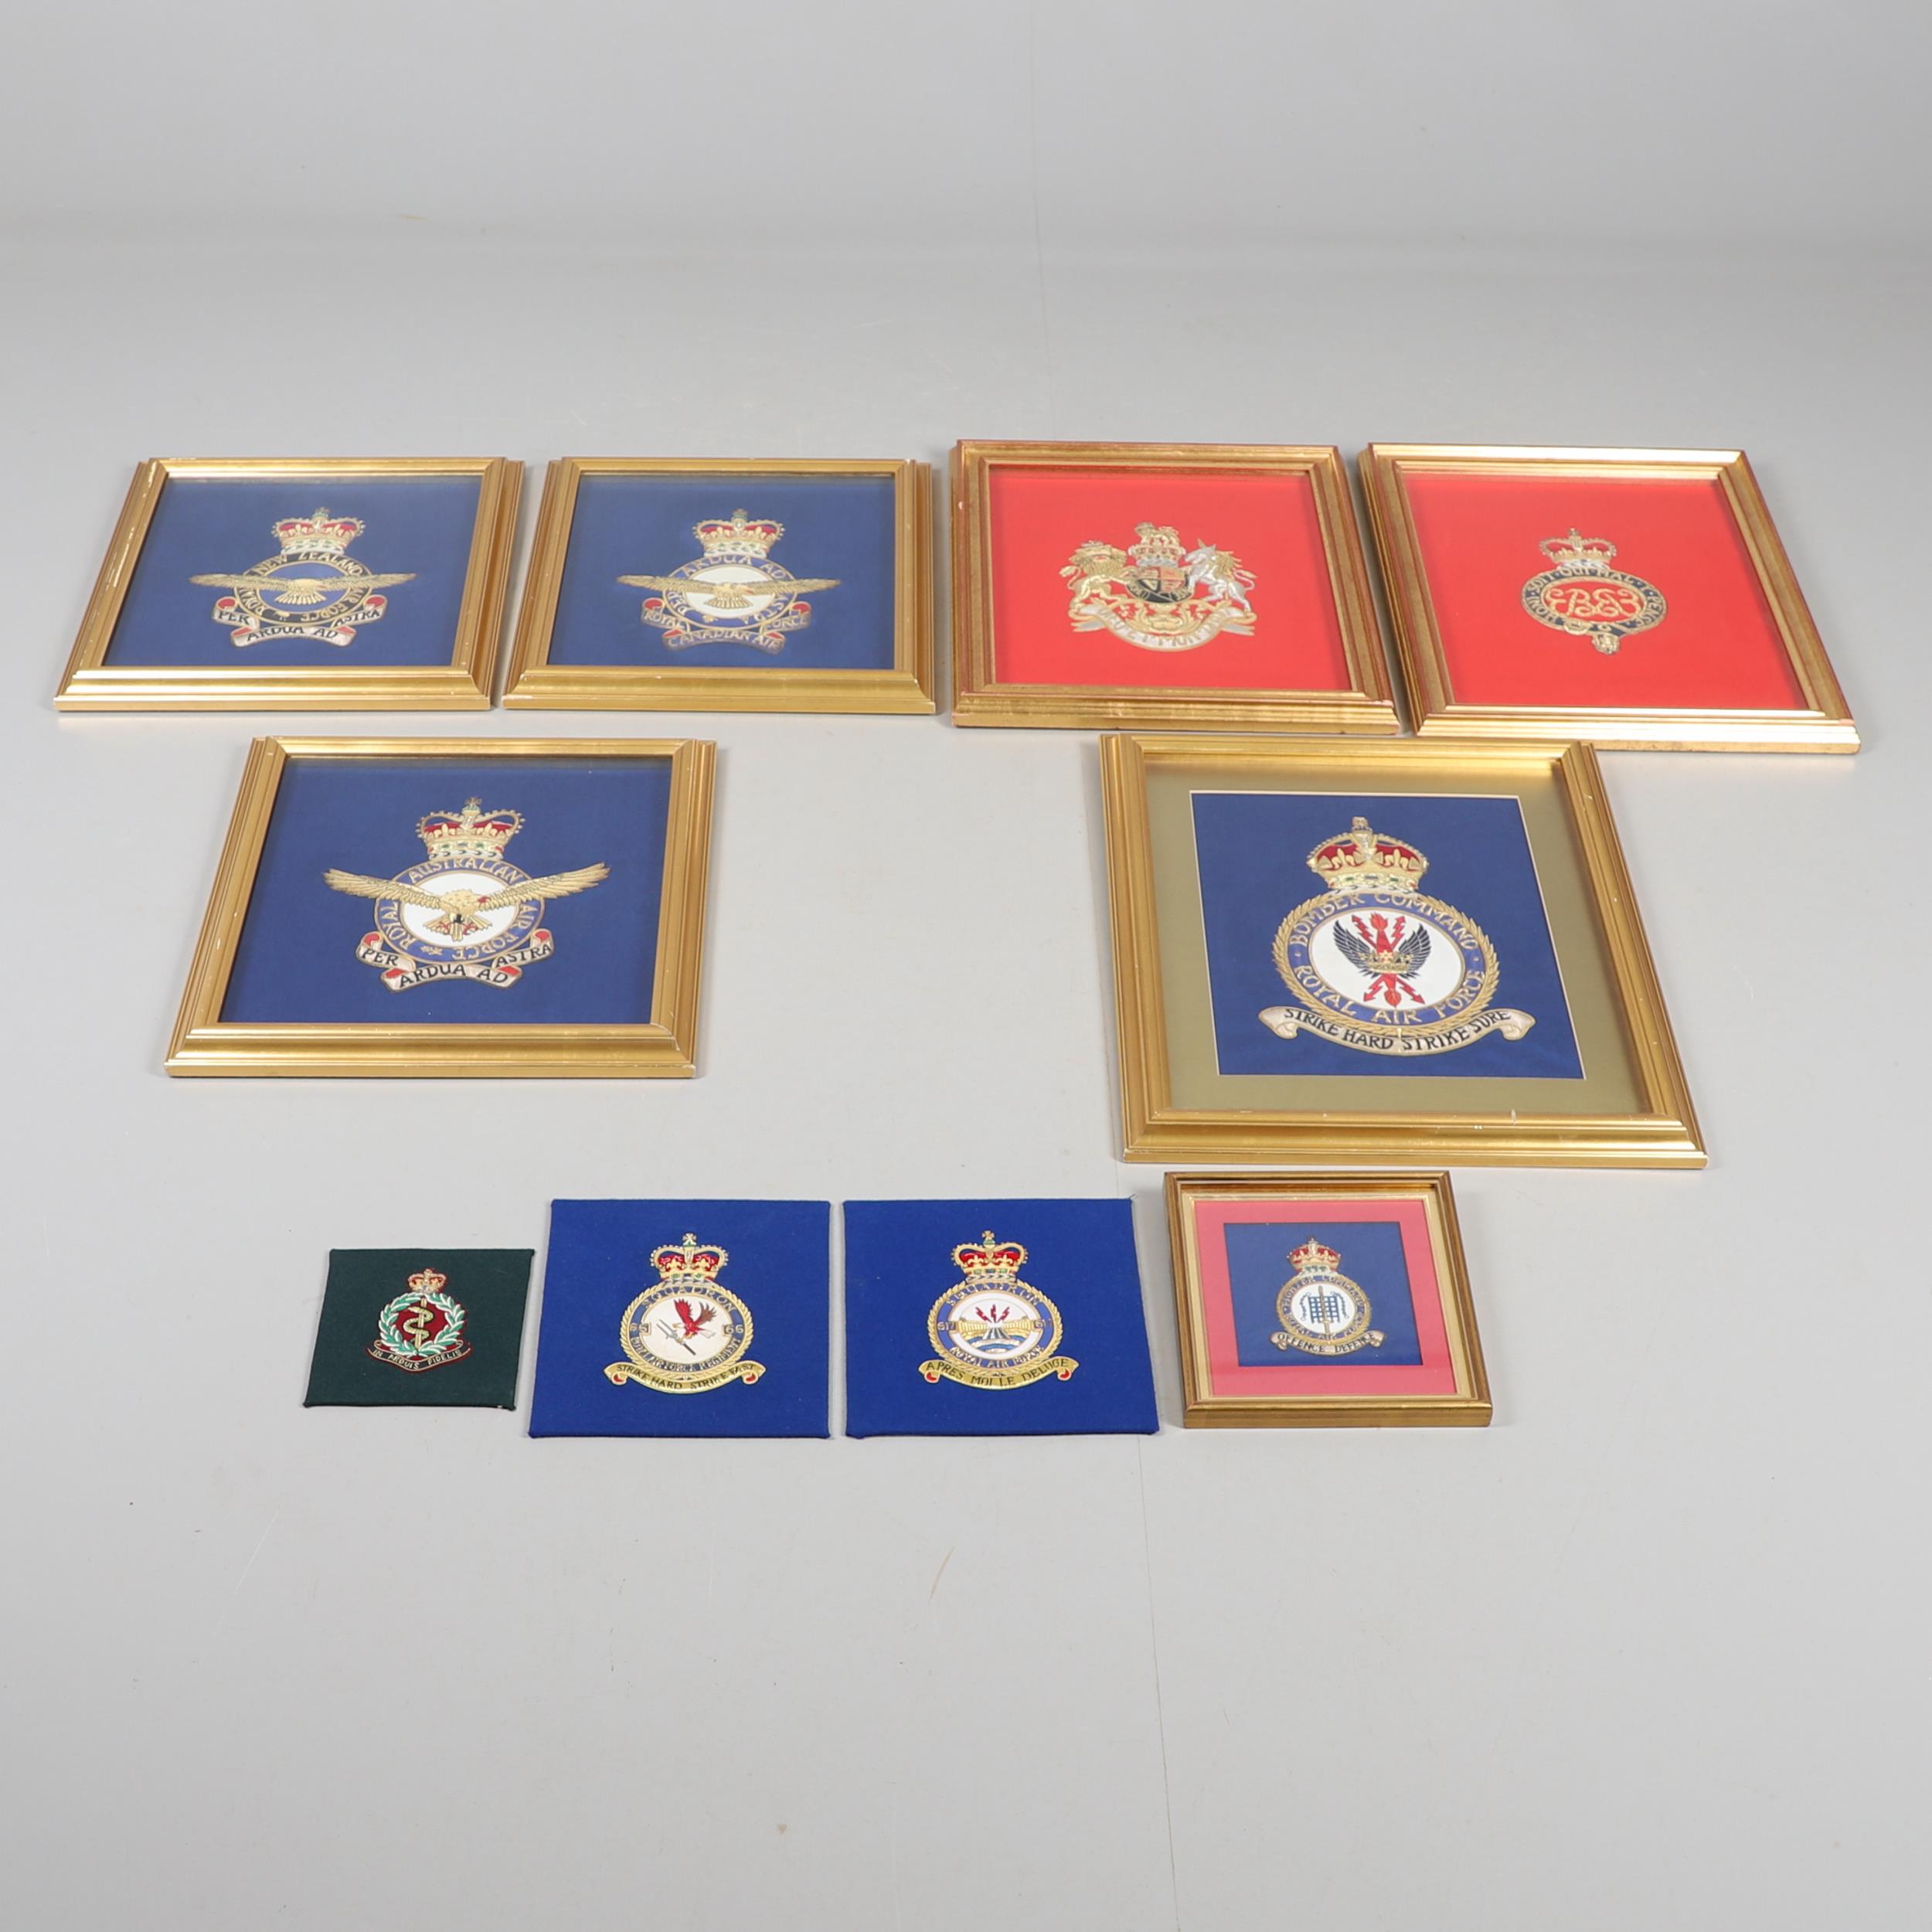 A COLLECTION OF FRAMED NEEDLEWORK MILITARY AND ROYAL CRESTS.